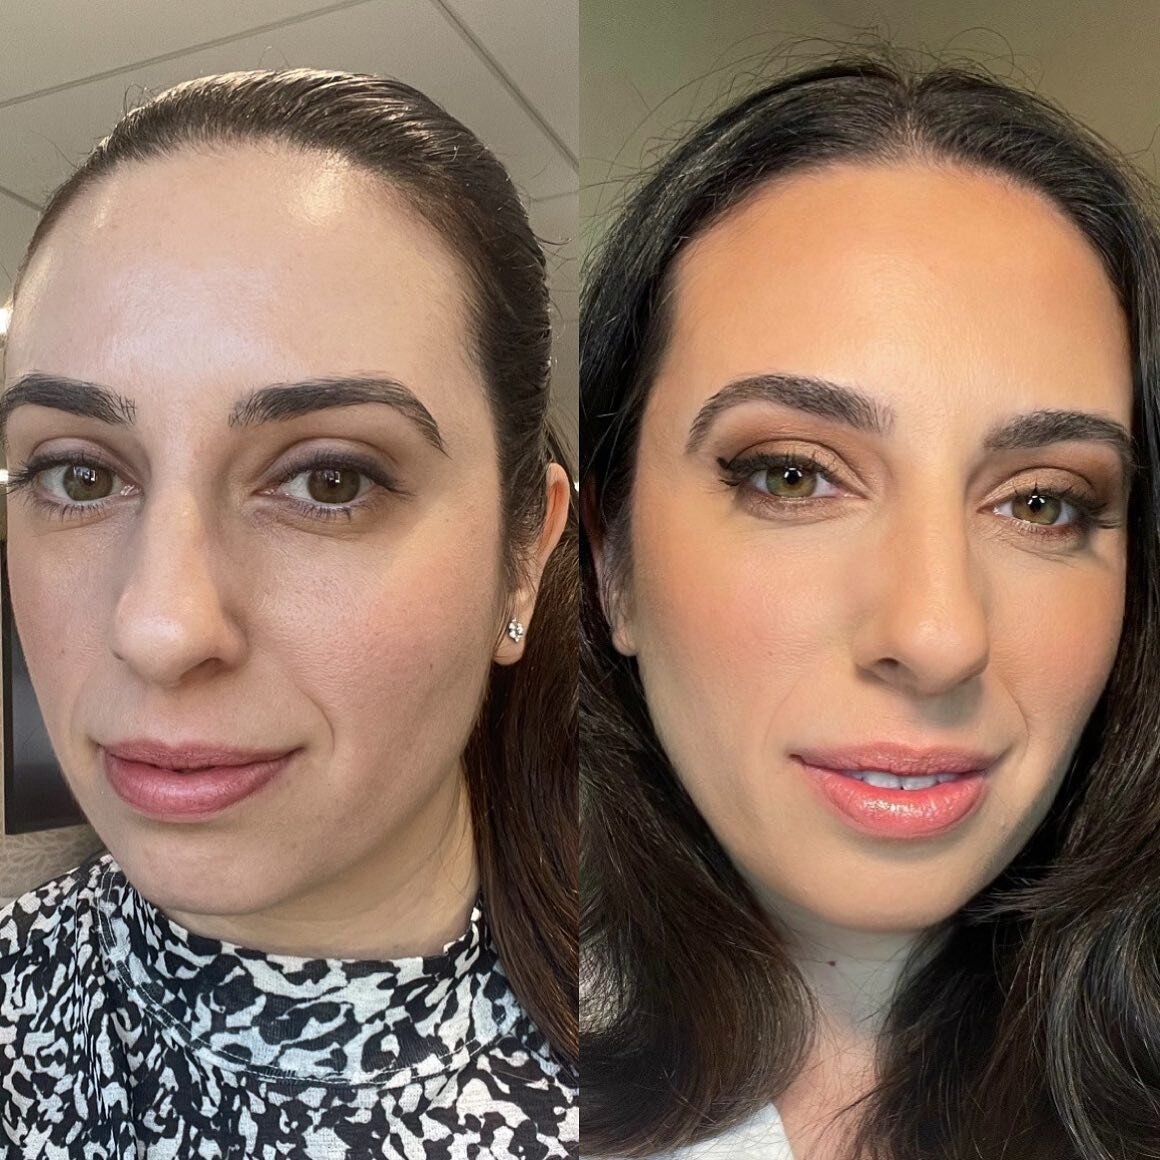 Had the pleasure of enhancing the very beautiful features of Steph, who attended a wedding in Sorrento over the weekend 💃
Before-(ish) and after ✨

Makeup by @kateashmanmakeup

Hit the Message button if you have an event you&rsquo;d like to chat abo